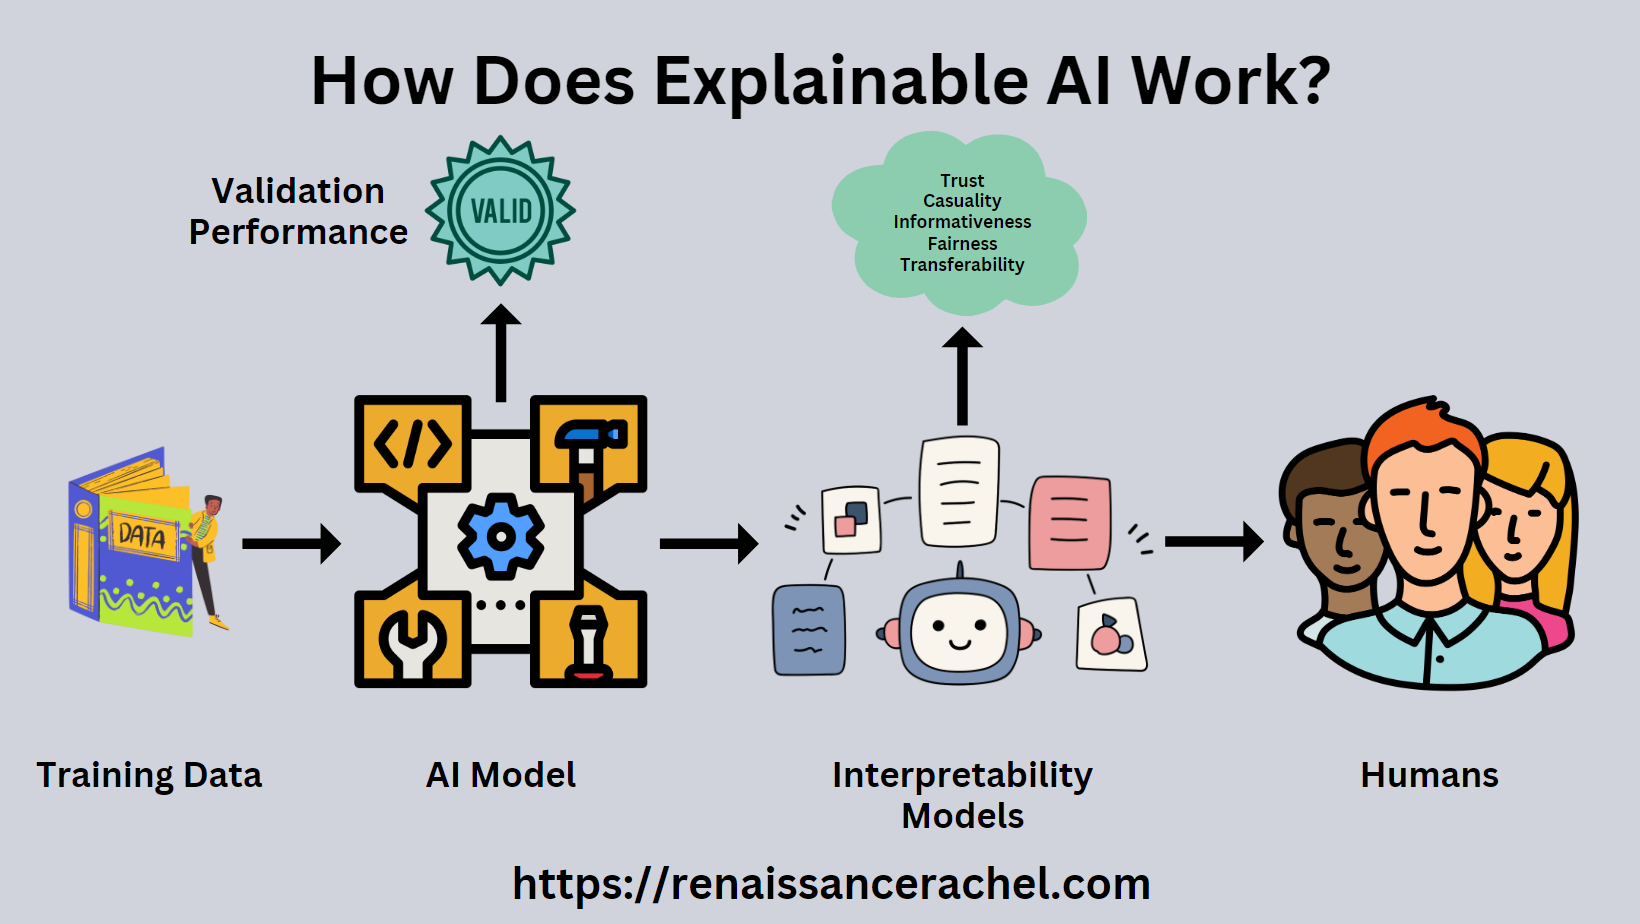 The Explainable AI (XAI) workflow showing how data, the AI model, interpretability, and the human users are all used to demonstrate explainability is in deep learning models. 